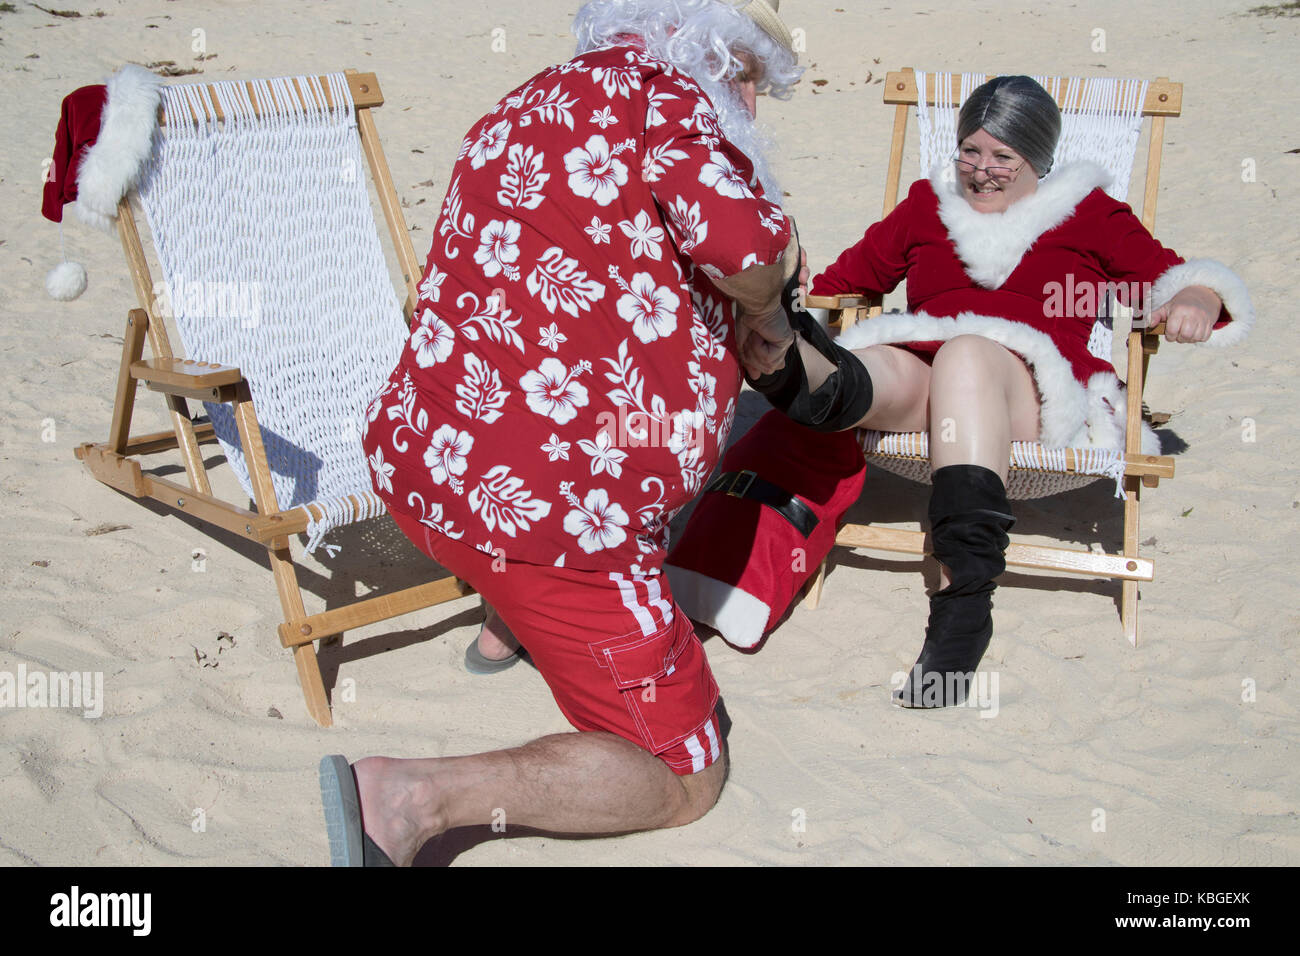 Santa Claus in red swimming trunks and Hawaiian shirt  on sandy beach helping to remove Mrs Claus boots. Stock Photo